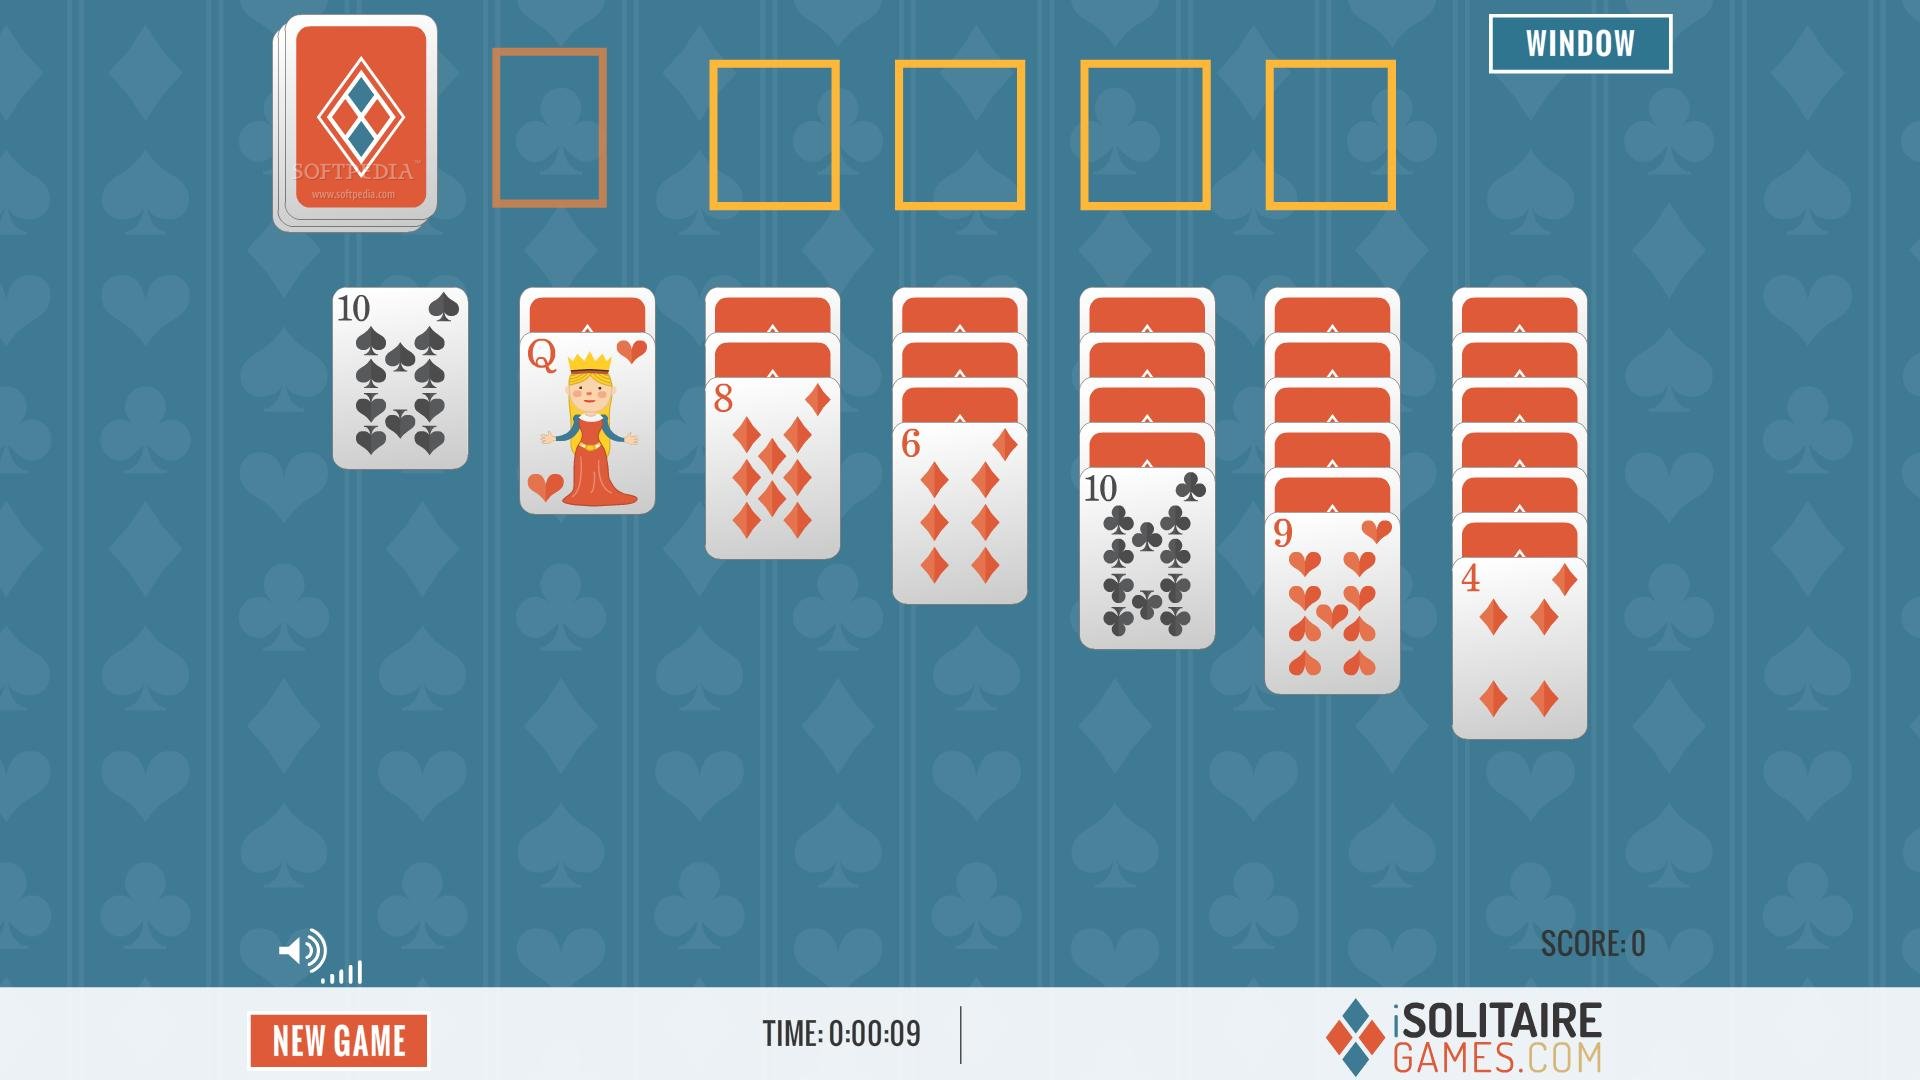 classic solitaire free download